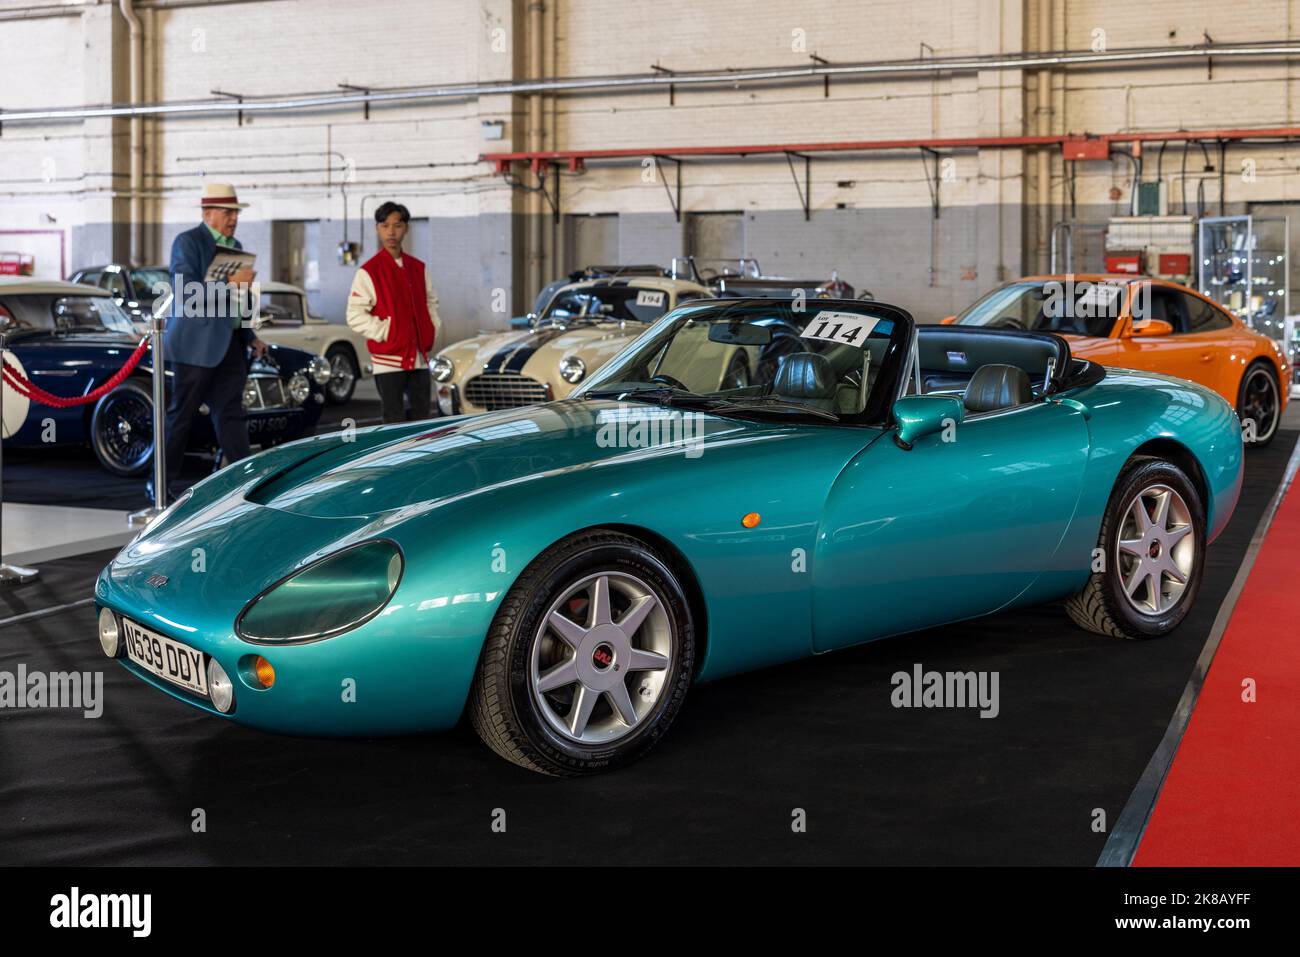 1996 TVR Griffith 500 ‘N539 DDY’ Stock Photo